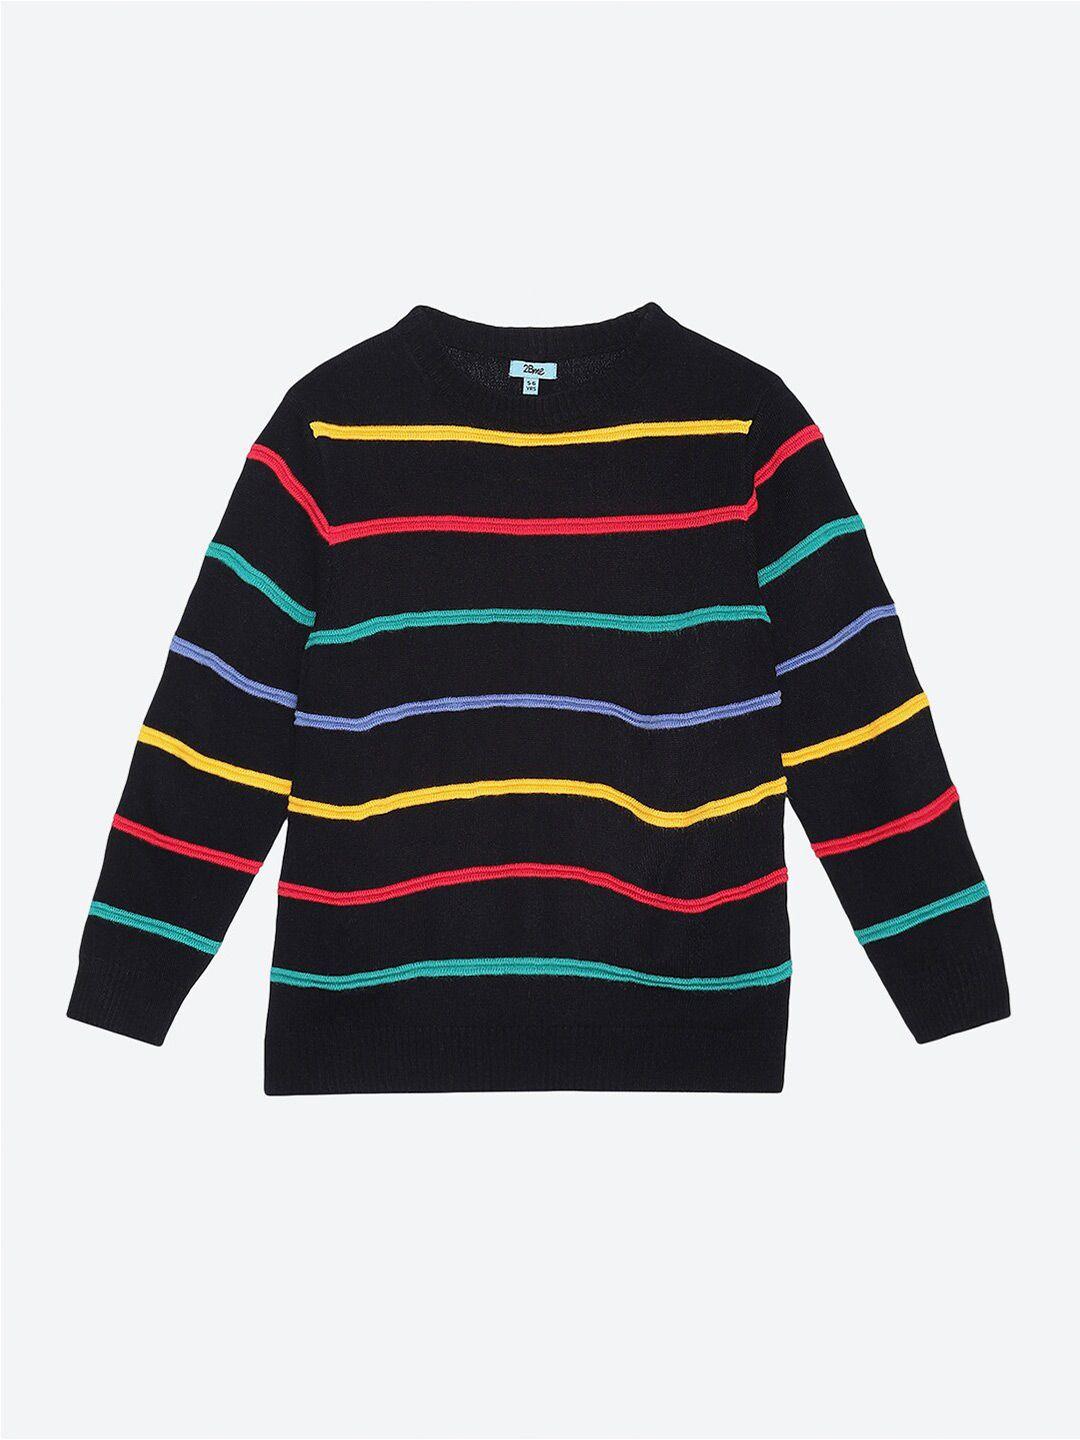 2bme boys striped acrylic pullover sweater